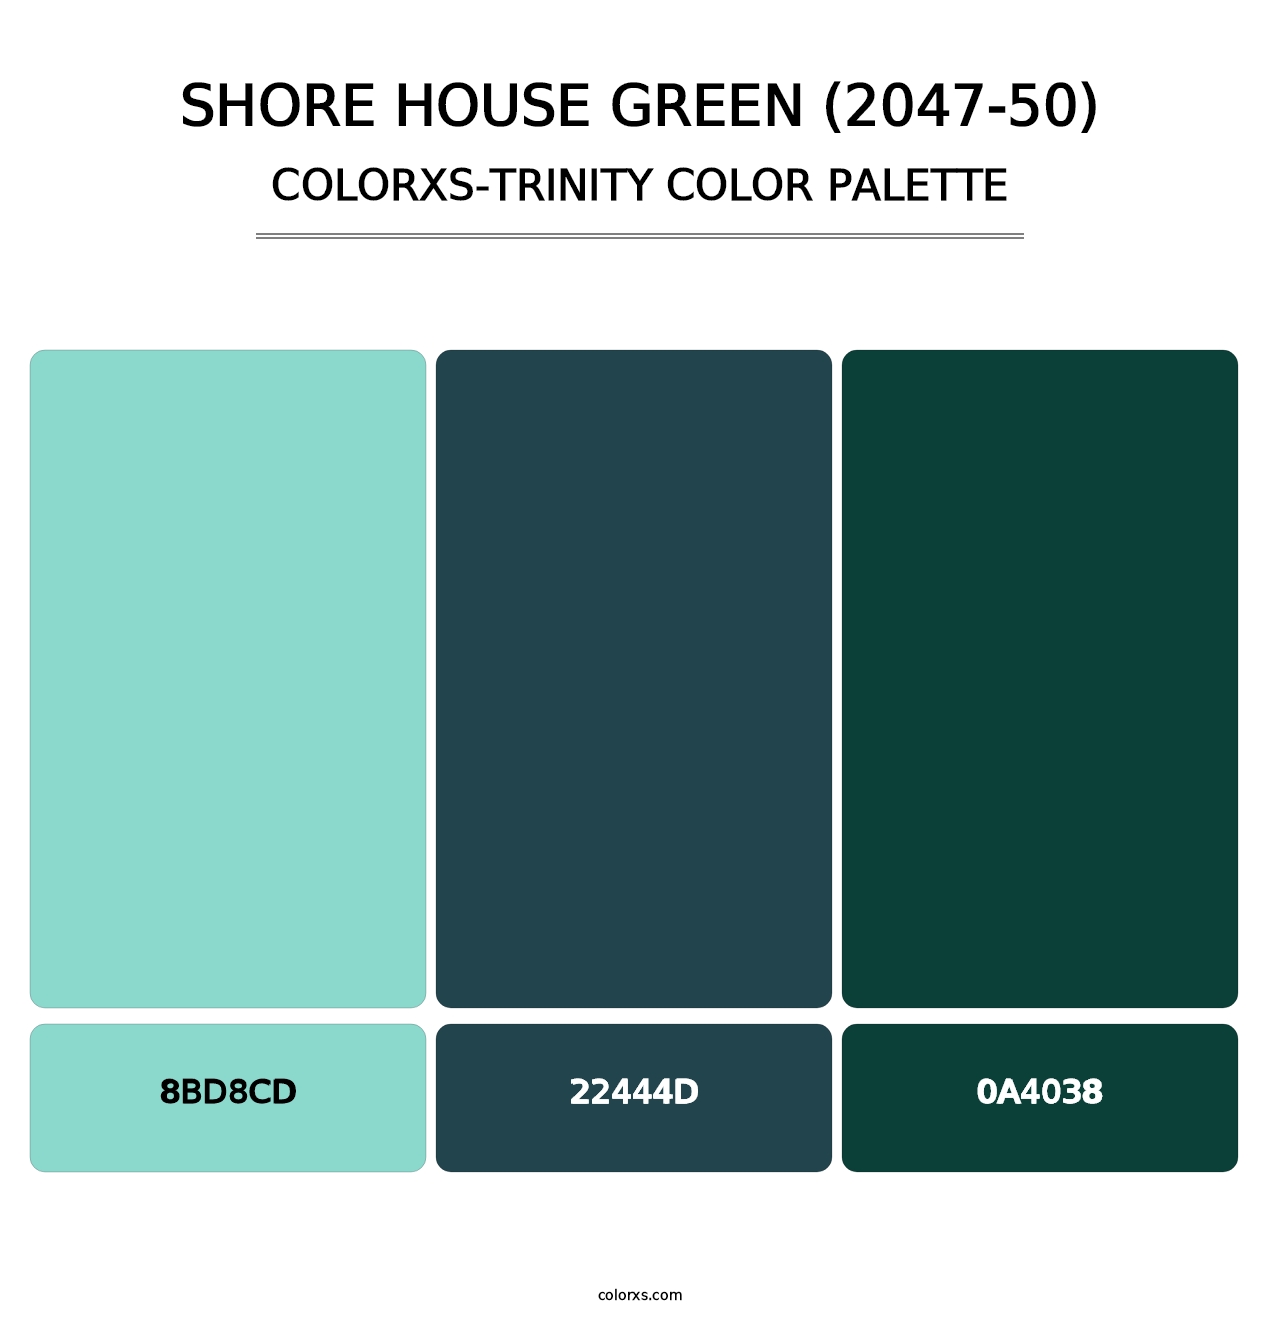 Shore House Green (2047-50) - Colorxs Trinity Palette